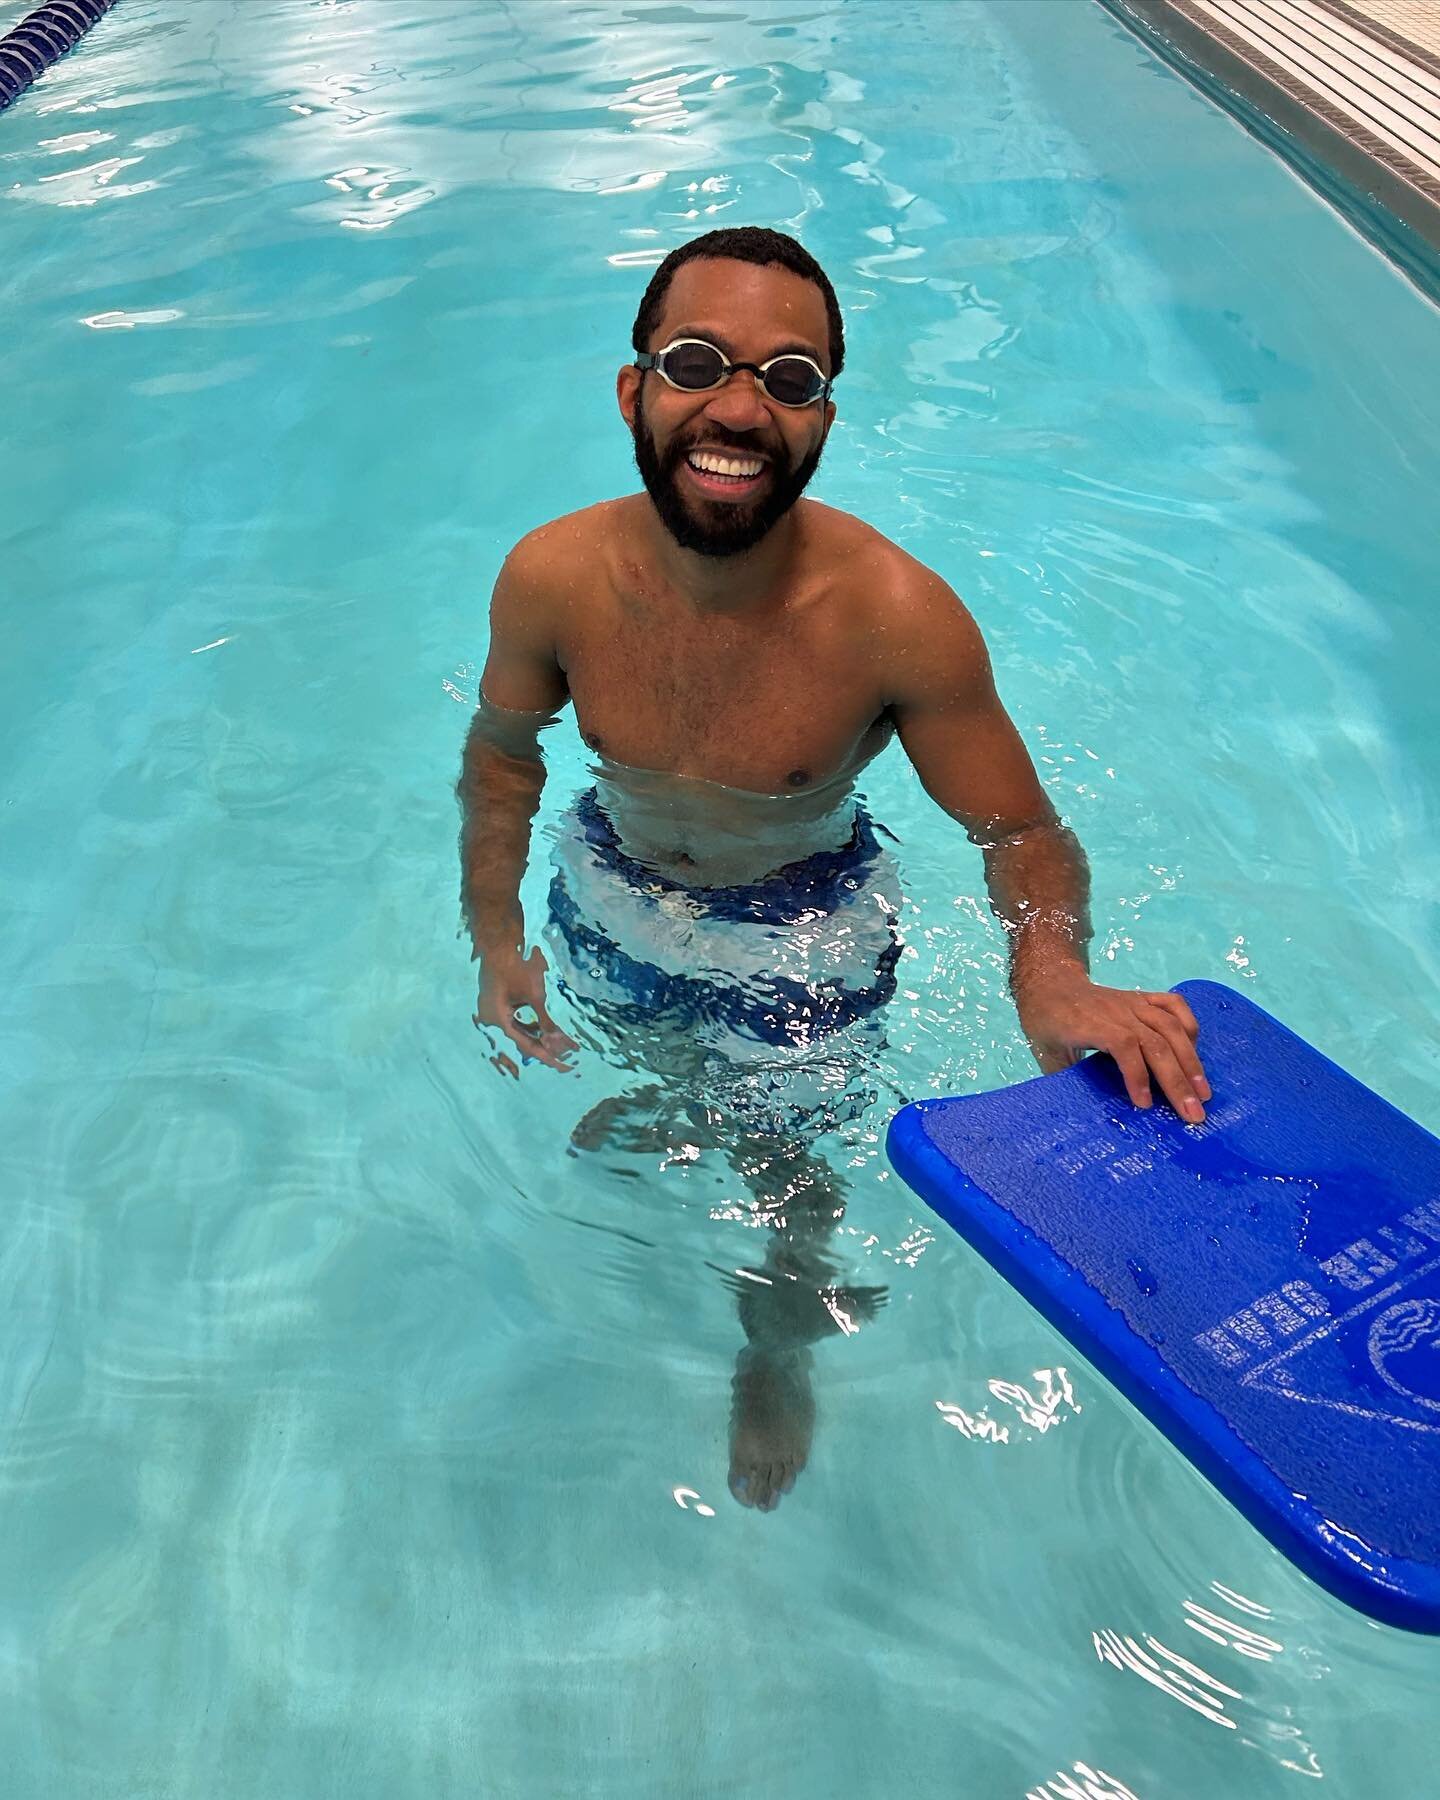 Meet Vinnie! Vinnie was Lakeside Swim Schools very first client. He is doing great and wants to learn how to swim in the open water for exercise. Cheers to Vinnie and his swimming journey.